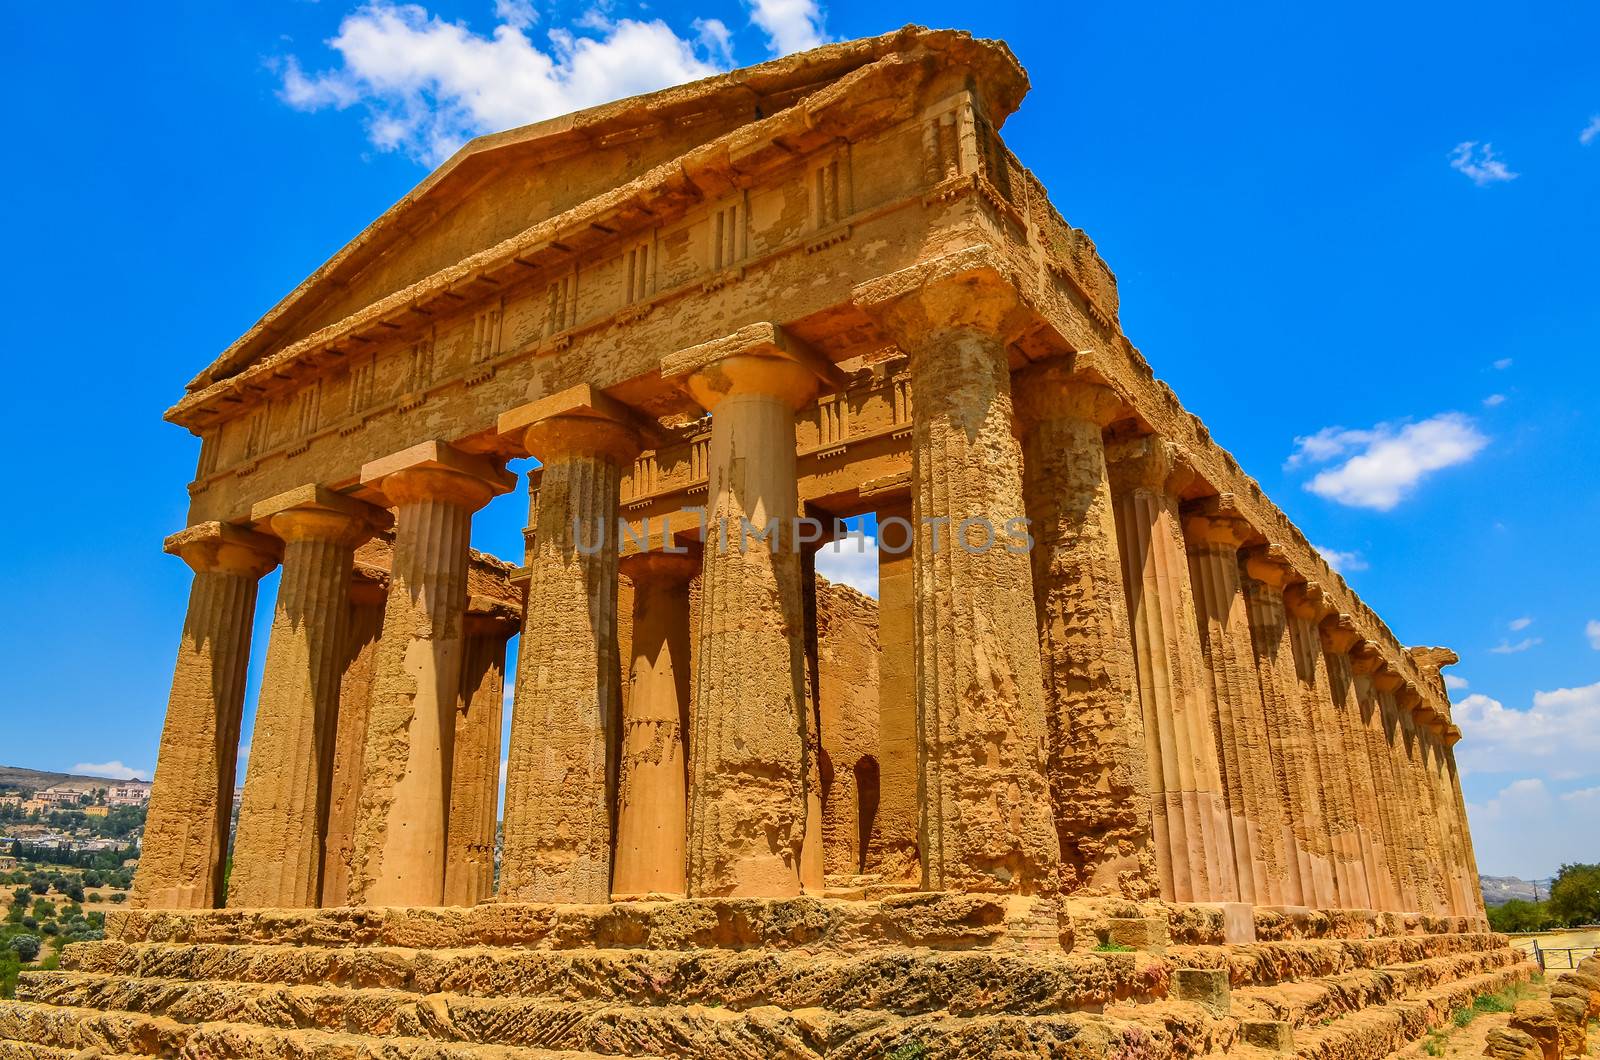 Ruins of ancient temple in Agrigento, Sicily, Italy